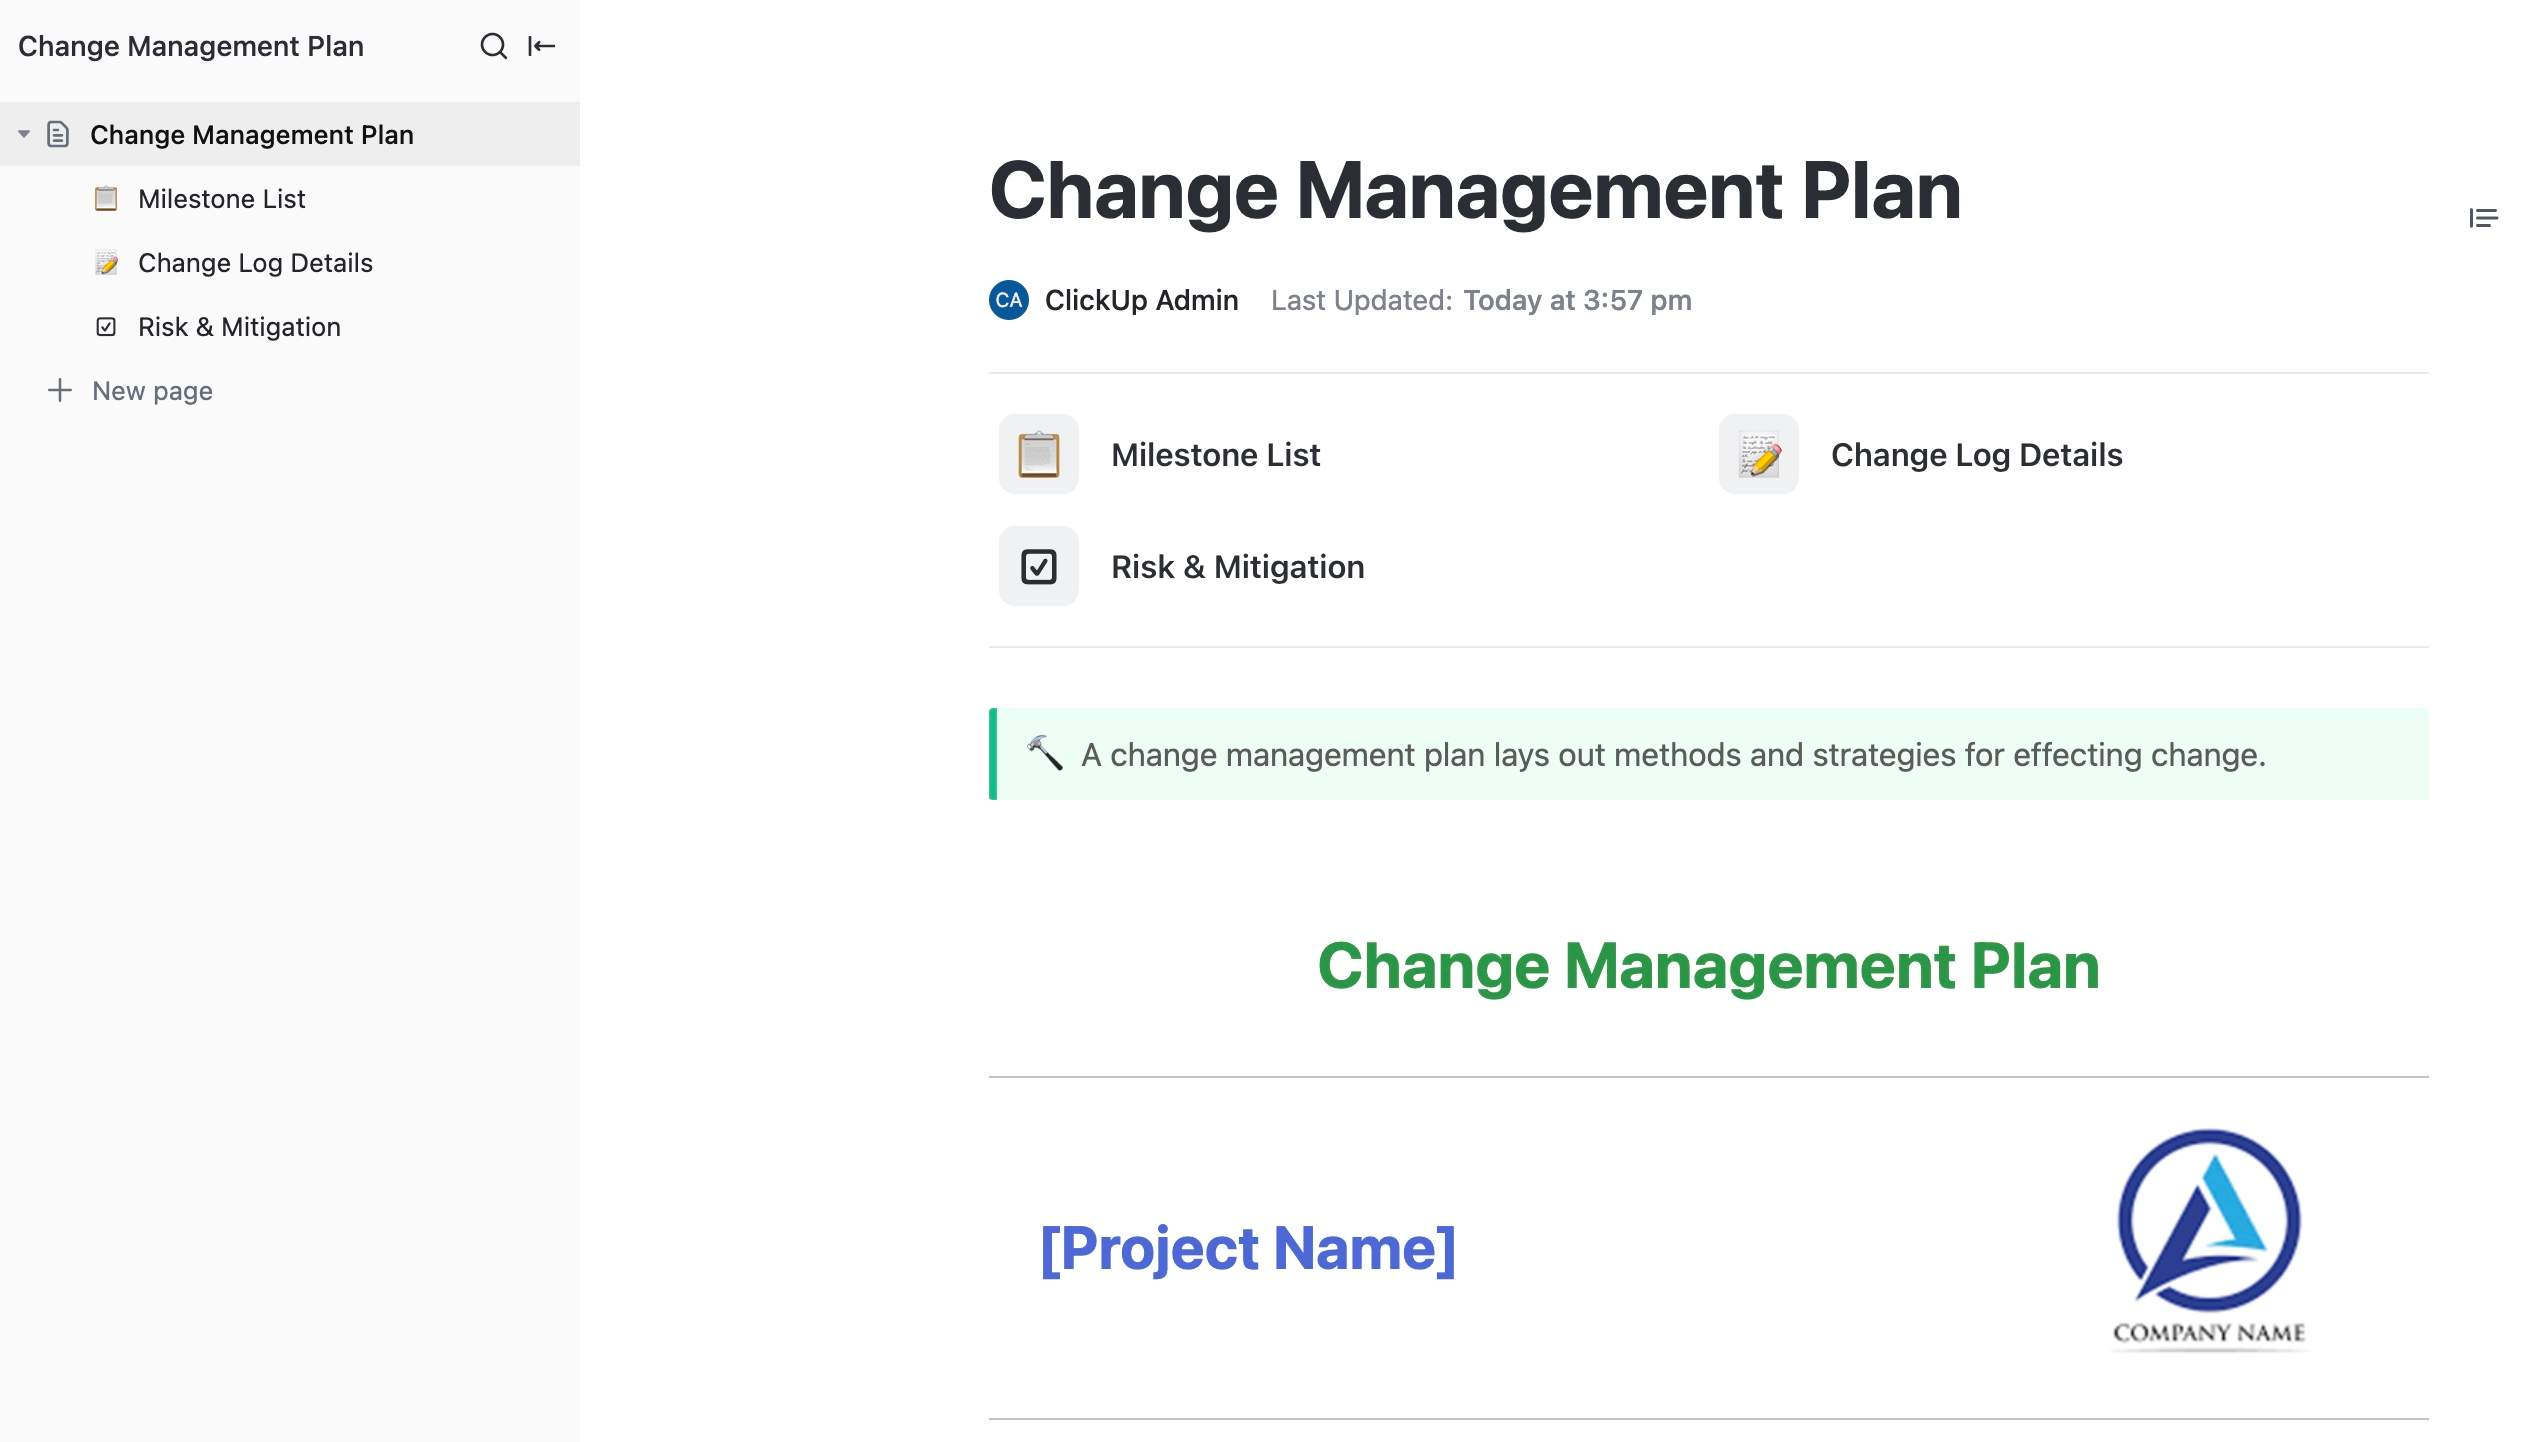 A change management plan lays out methods and strategies for effecting change.